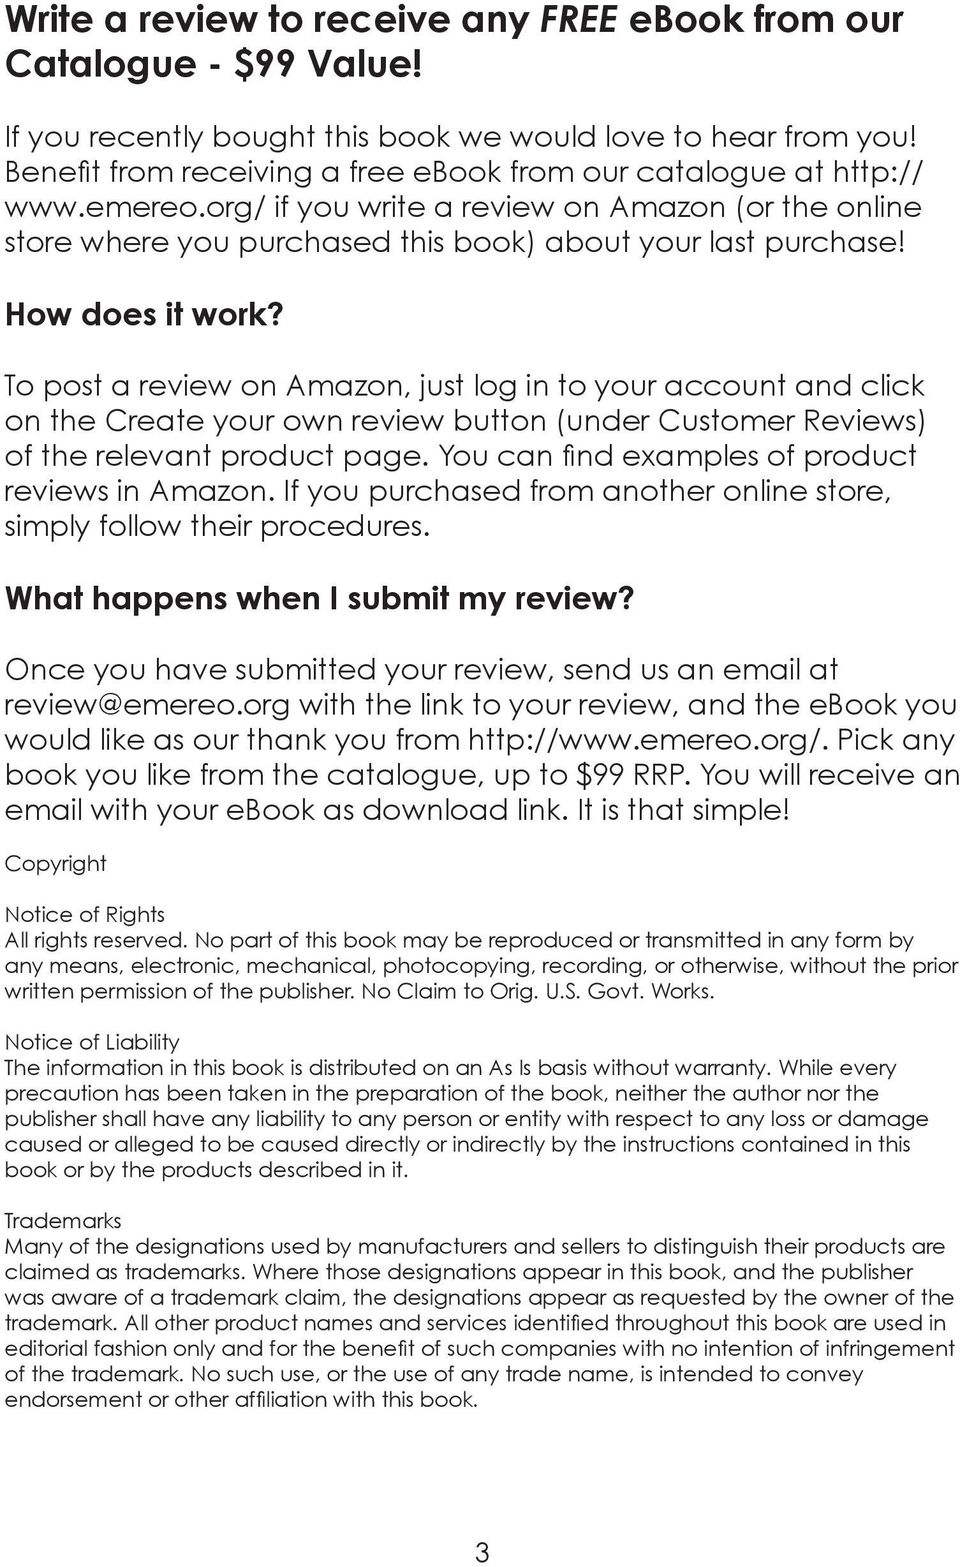 How does it work? To post a review on Amazon, just log in to your account and click on the Create your own review button (under Customer Reviews) of the relevant product page.